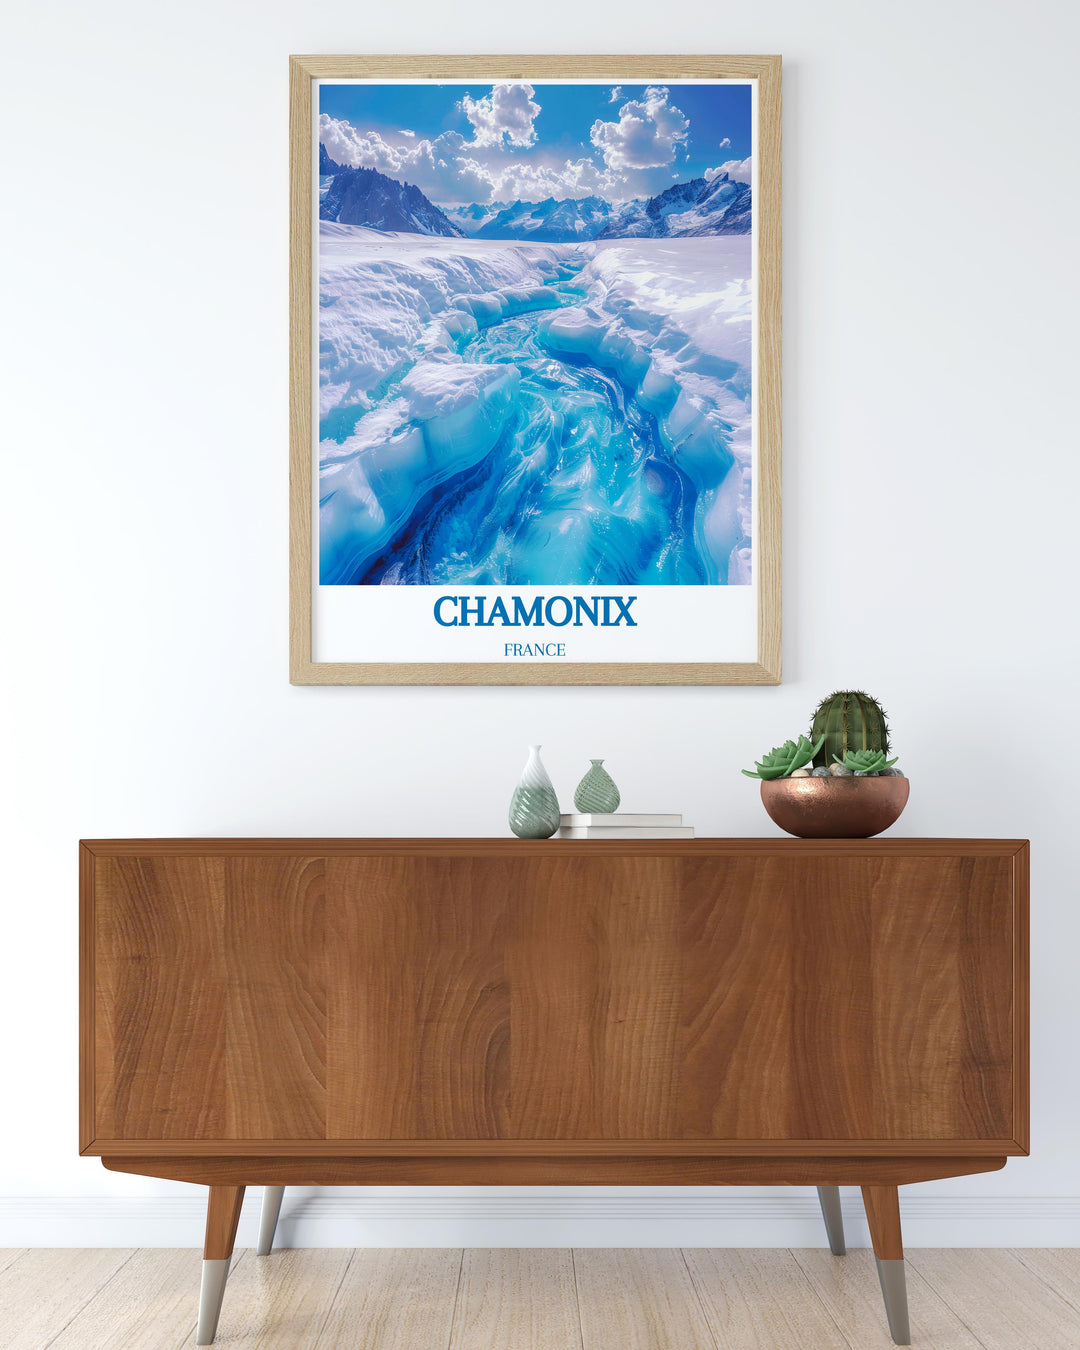 Chamonix valley overview featuring Mer de Glace, ski tracks and gondolas, encapsulated in a classic framed print